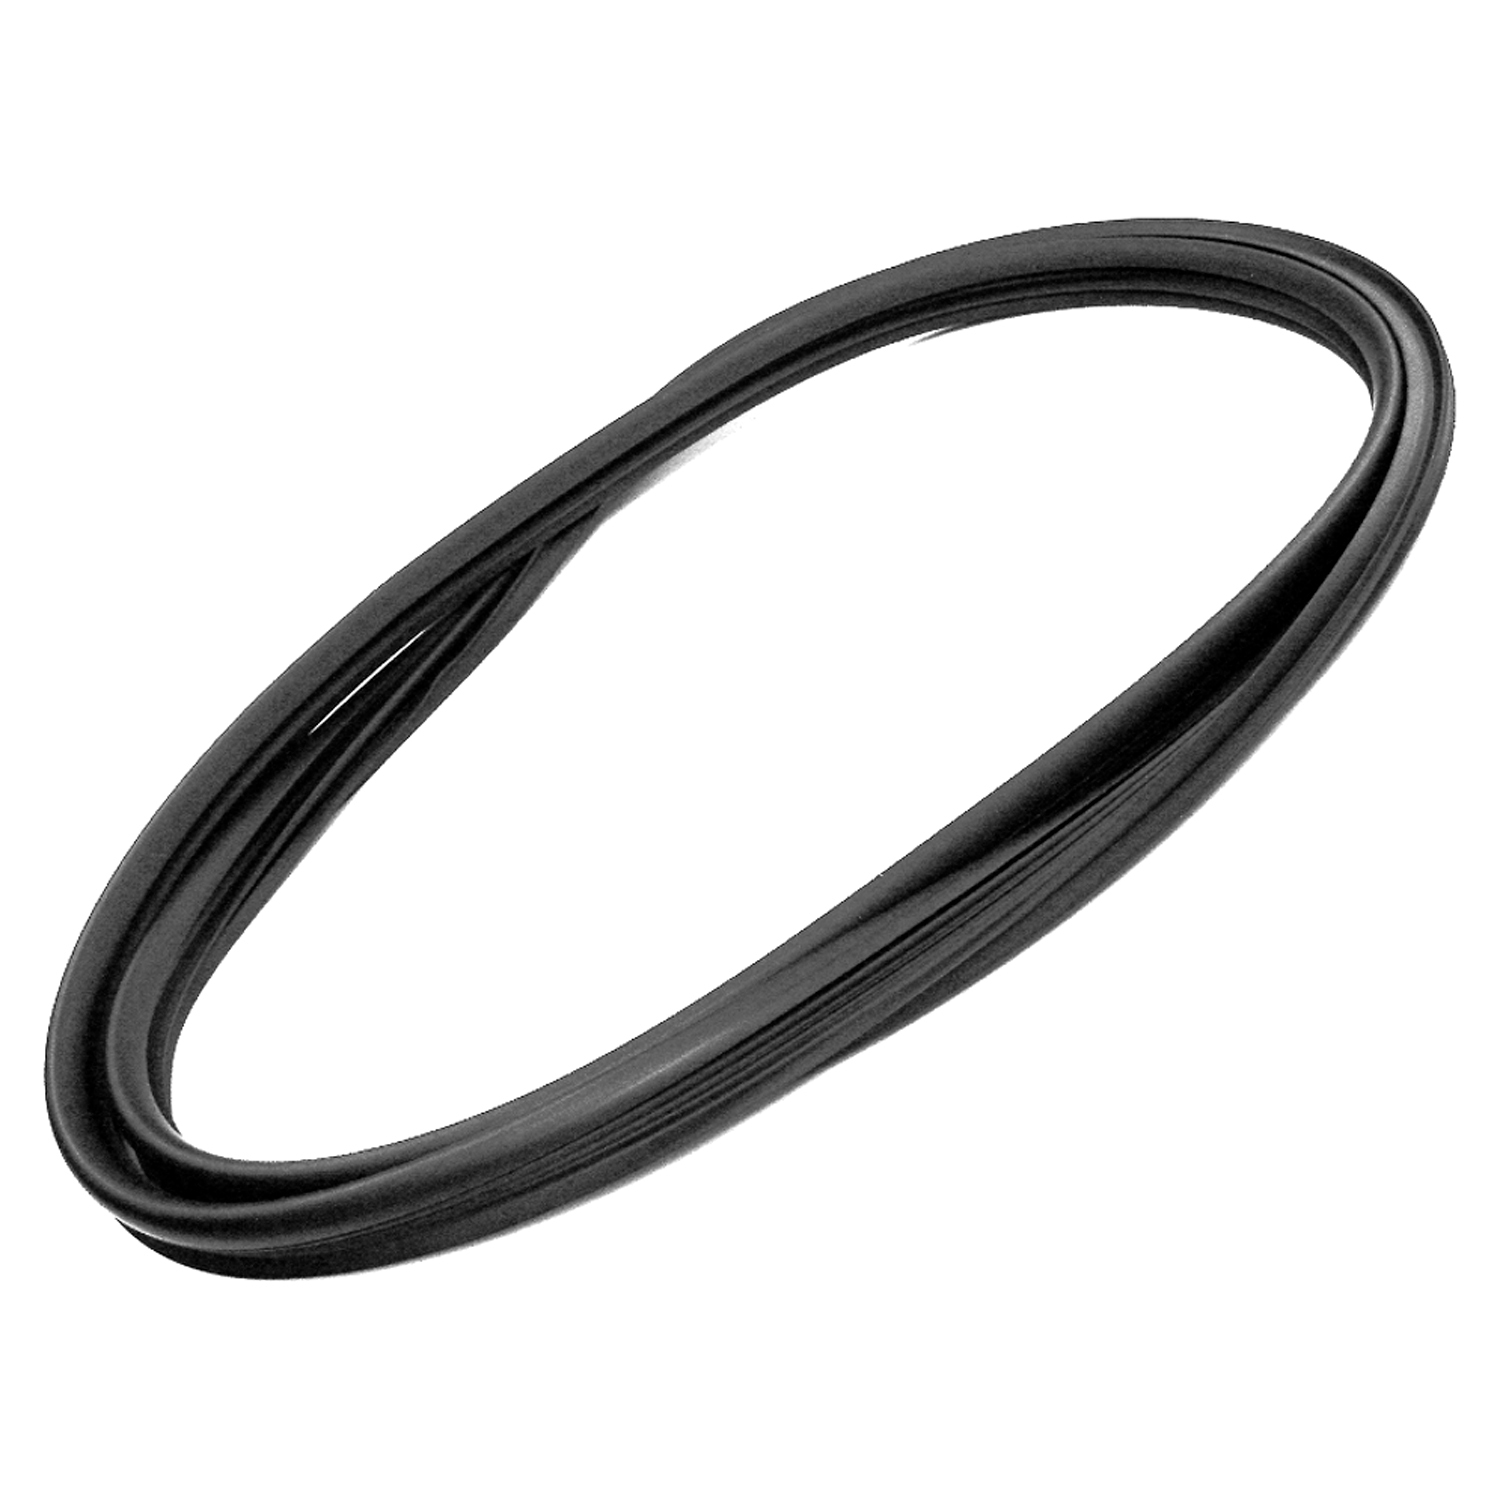 1985 Chevrolet K20 Windshield Seal, 73-87 GM Full Size Truck, 73-91 GM SUV, Without Trim Groove-VWS 7313-D